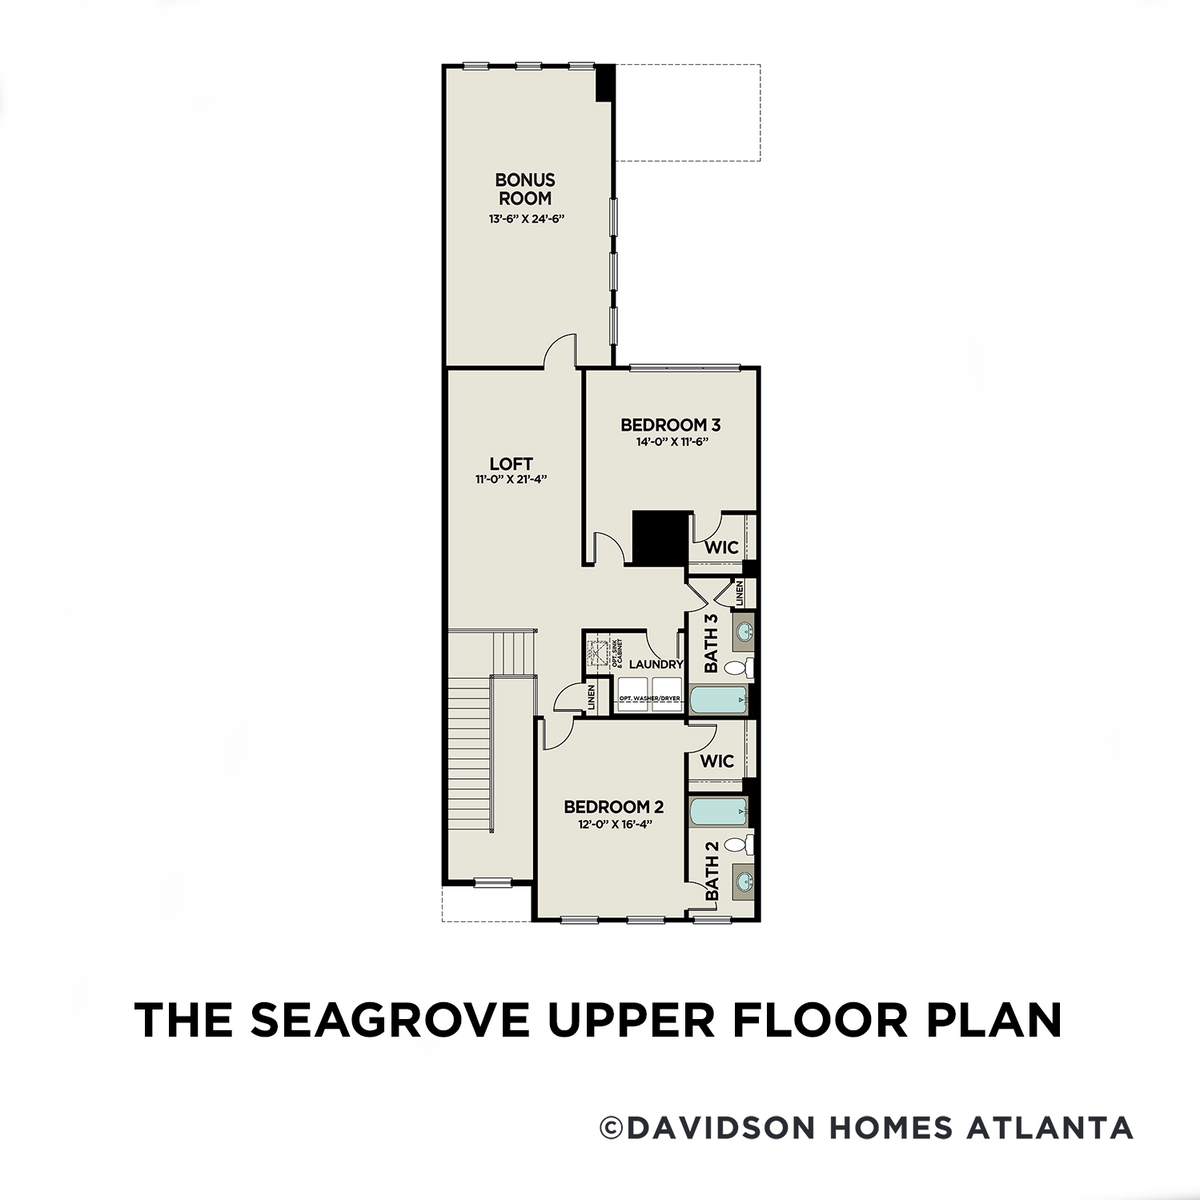 2 - The Seagrove C floor plan layout for 746 Stickley Oak Way in Davidson Homes' The Village at Towne Lake community.